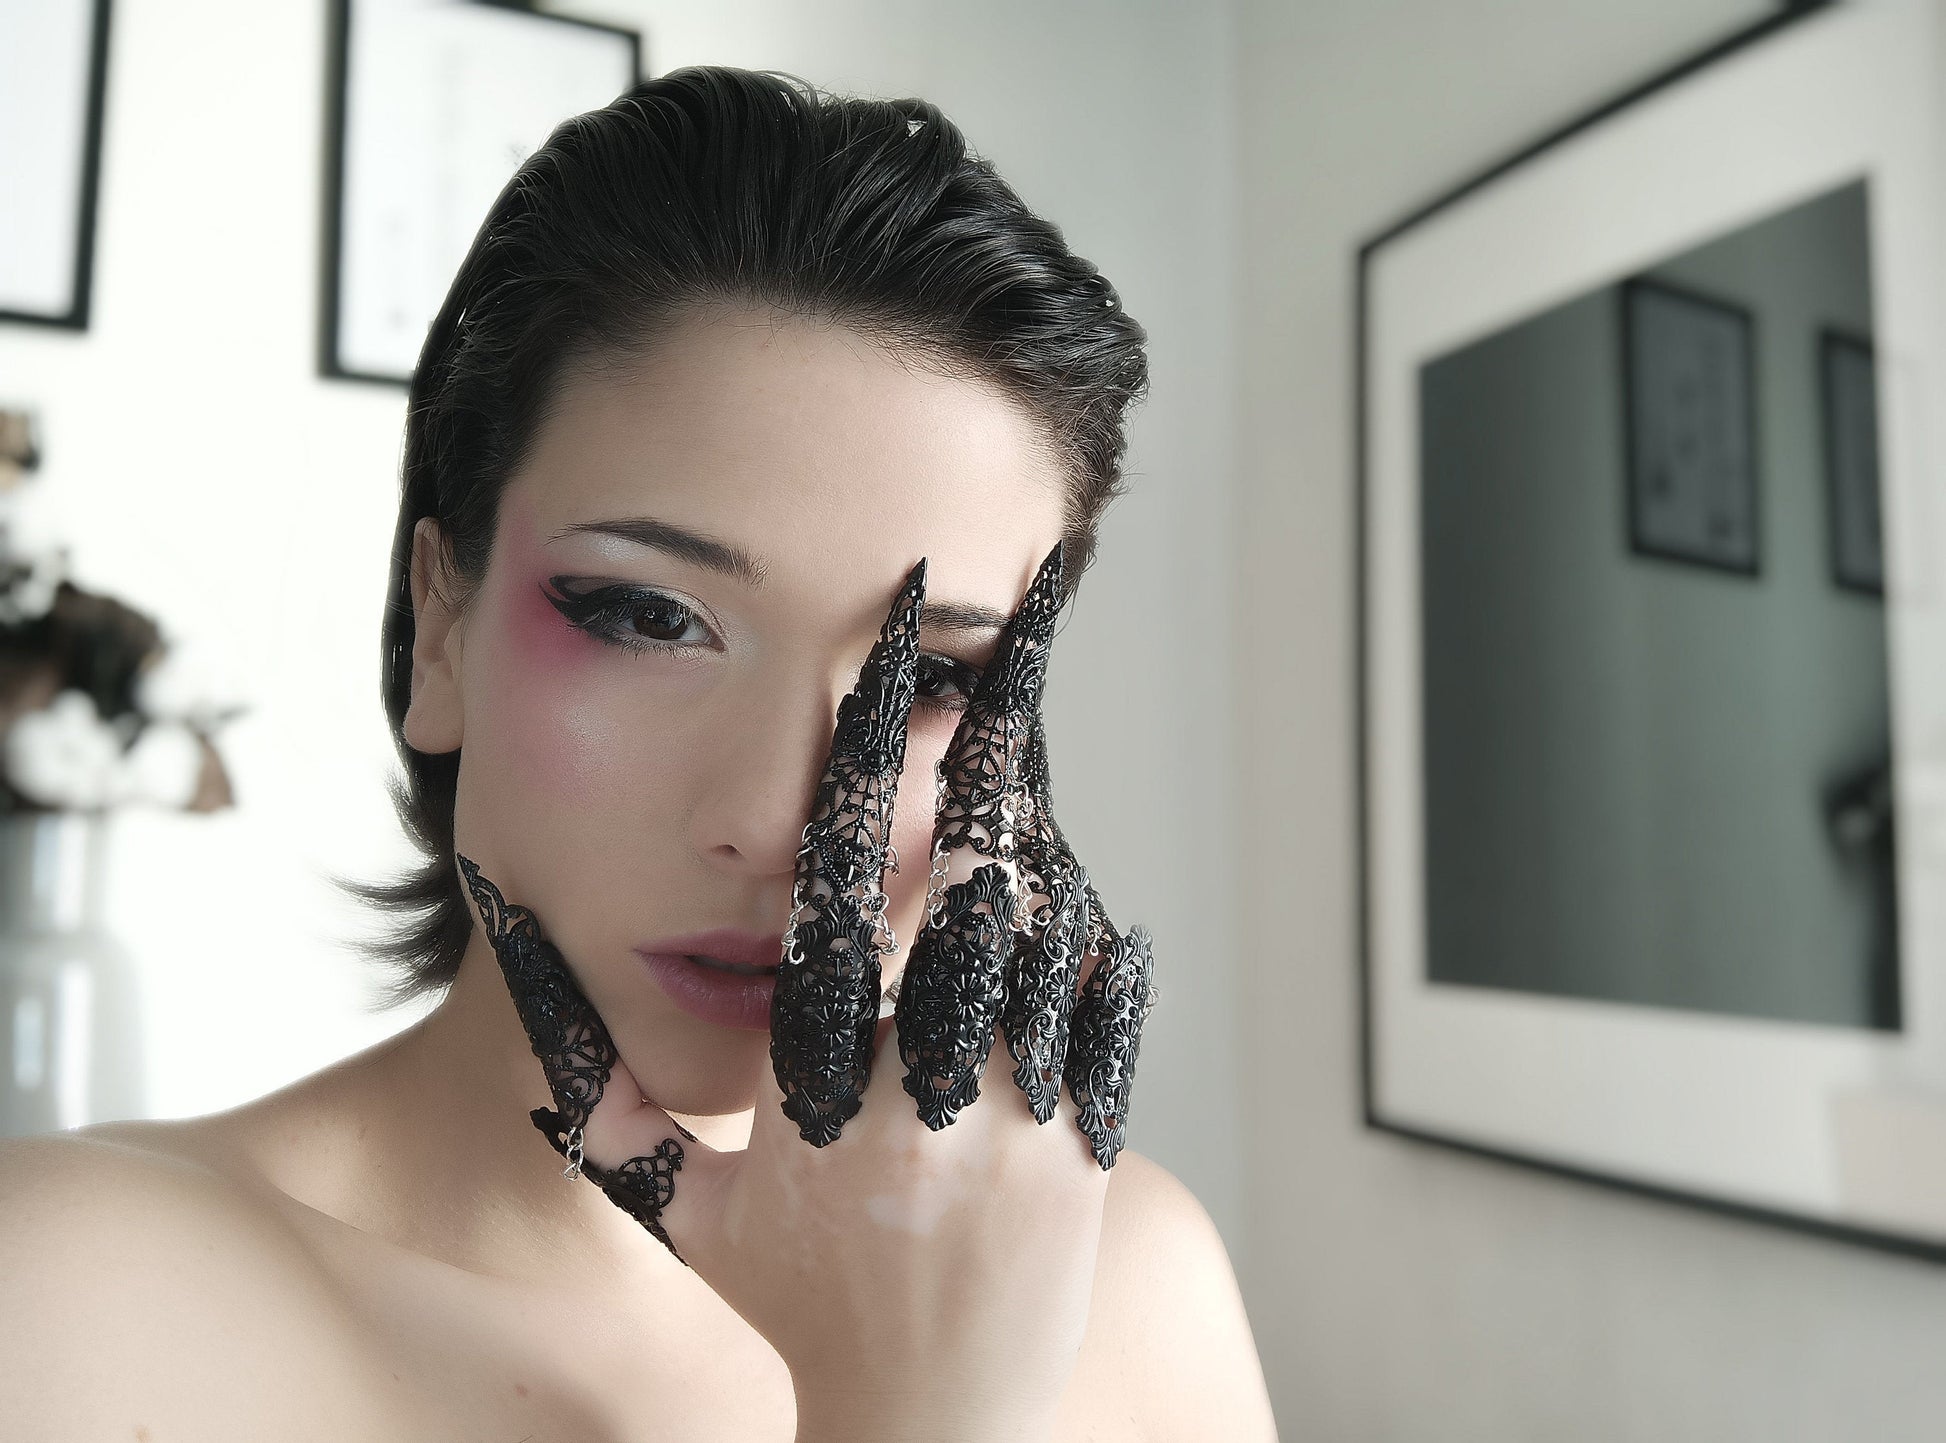 A model poses with Myril Jewels' gothic black full-finger rings, each finger adorned with an intricate, claw-like design, perfect for a bold, dark-avantgarde look